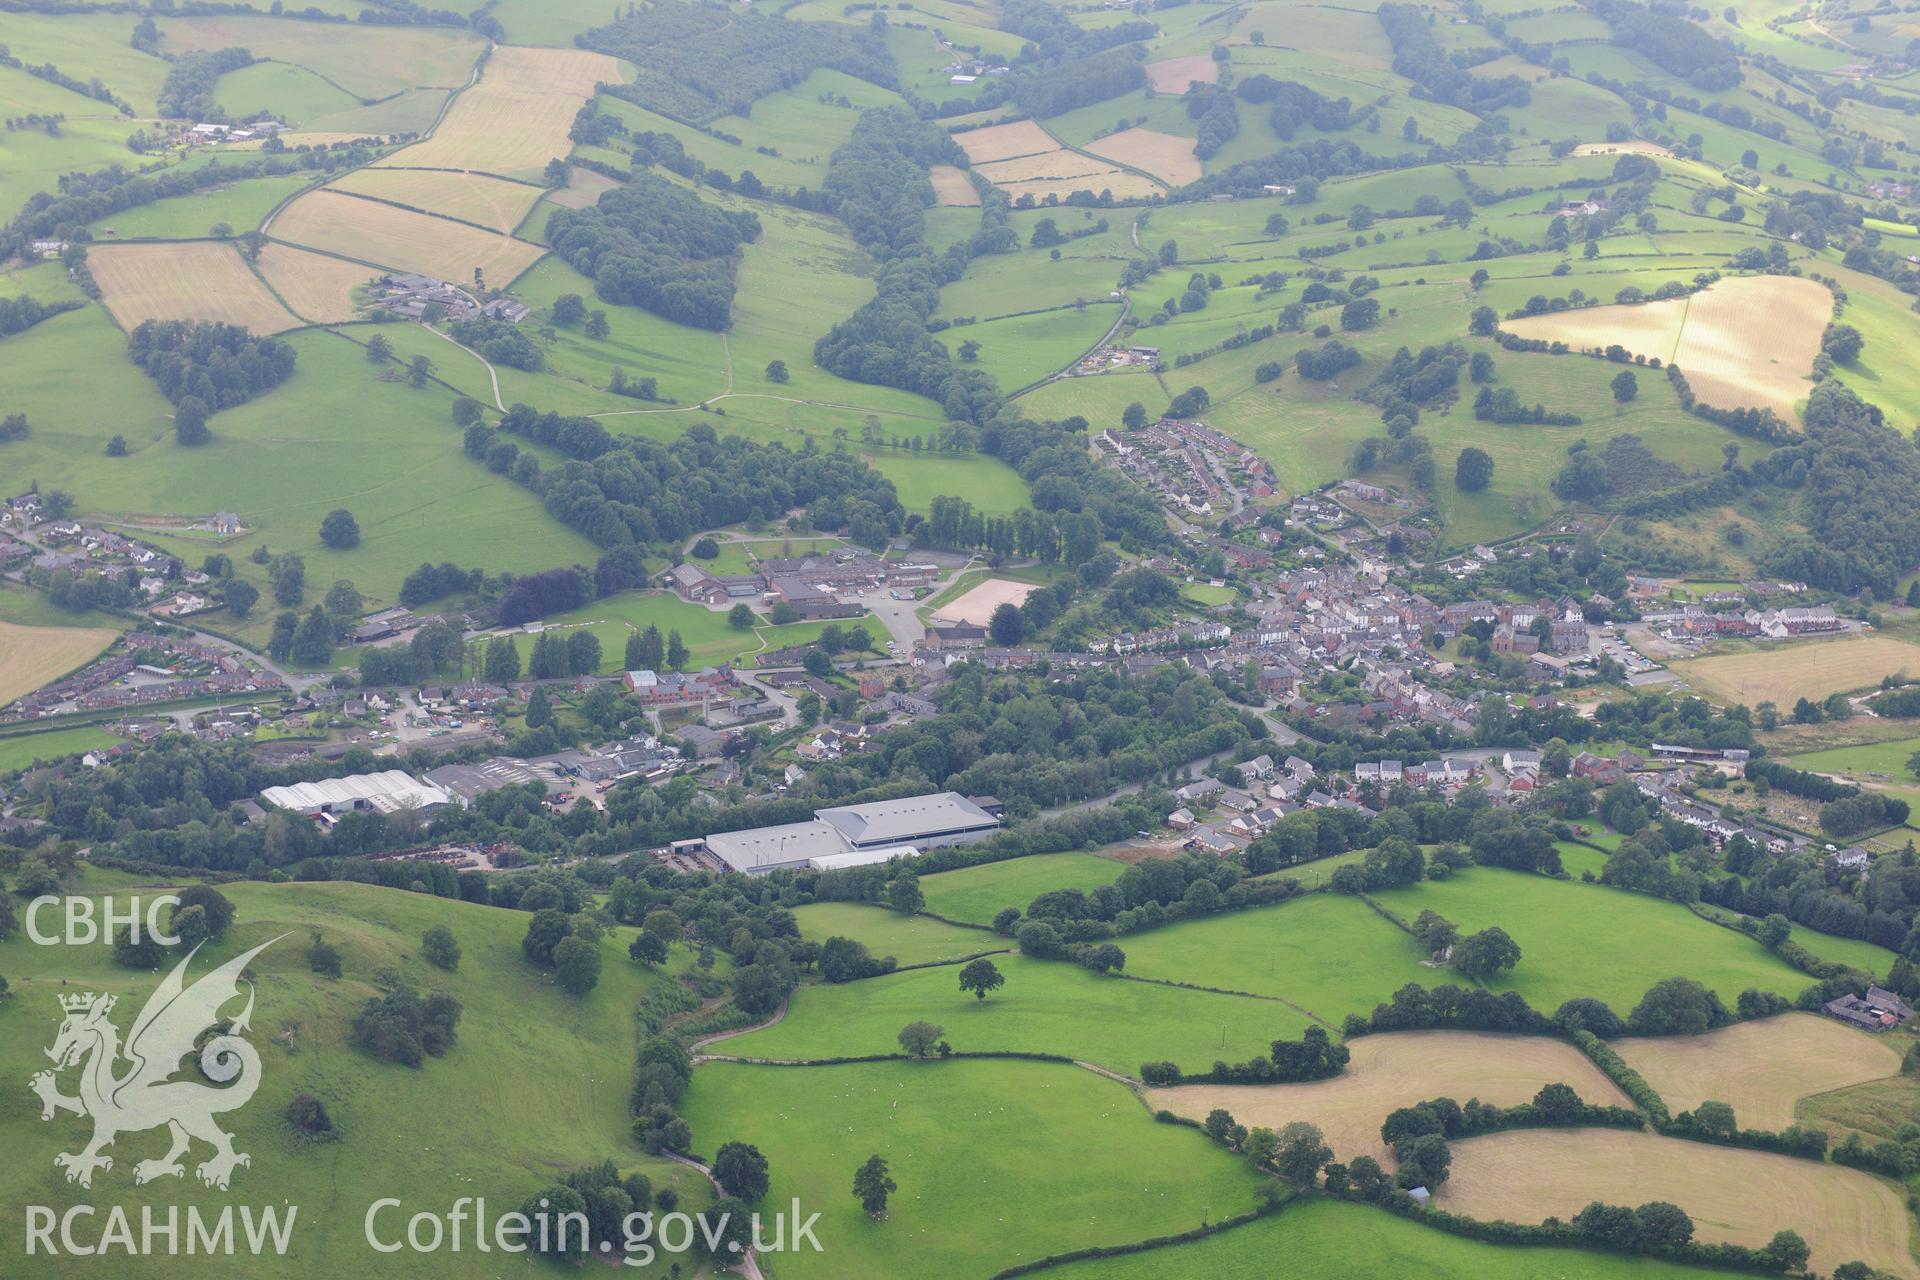 RCAHMW colour oblique photograph of Llanfyllin. Taken by Toby Driver on 27/07/2012.